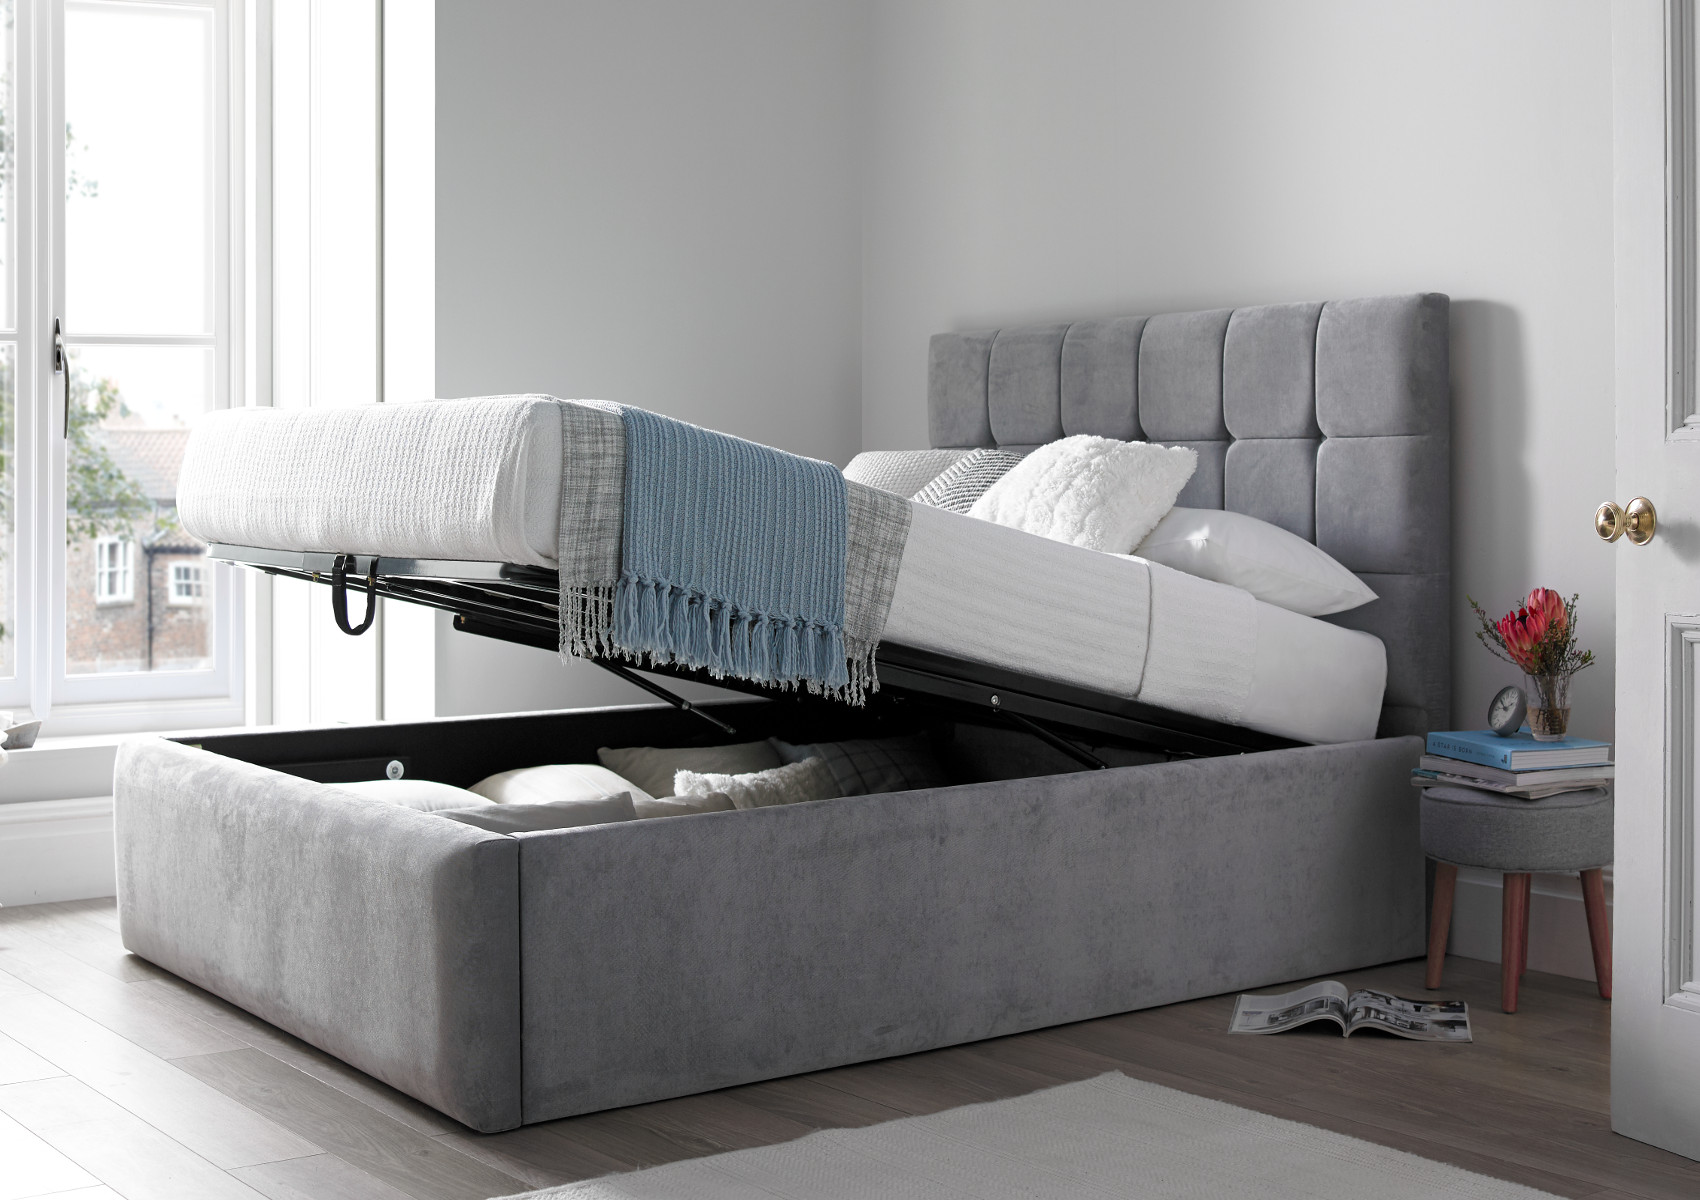 View Bromley Naples Silver Upholstered Double Ottoman Bed Time4Sleep information